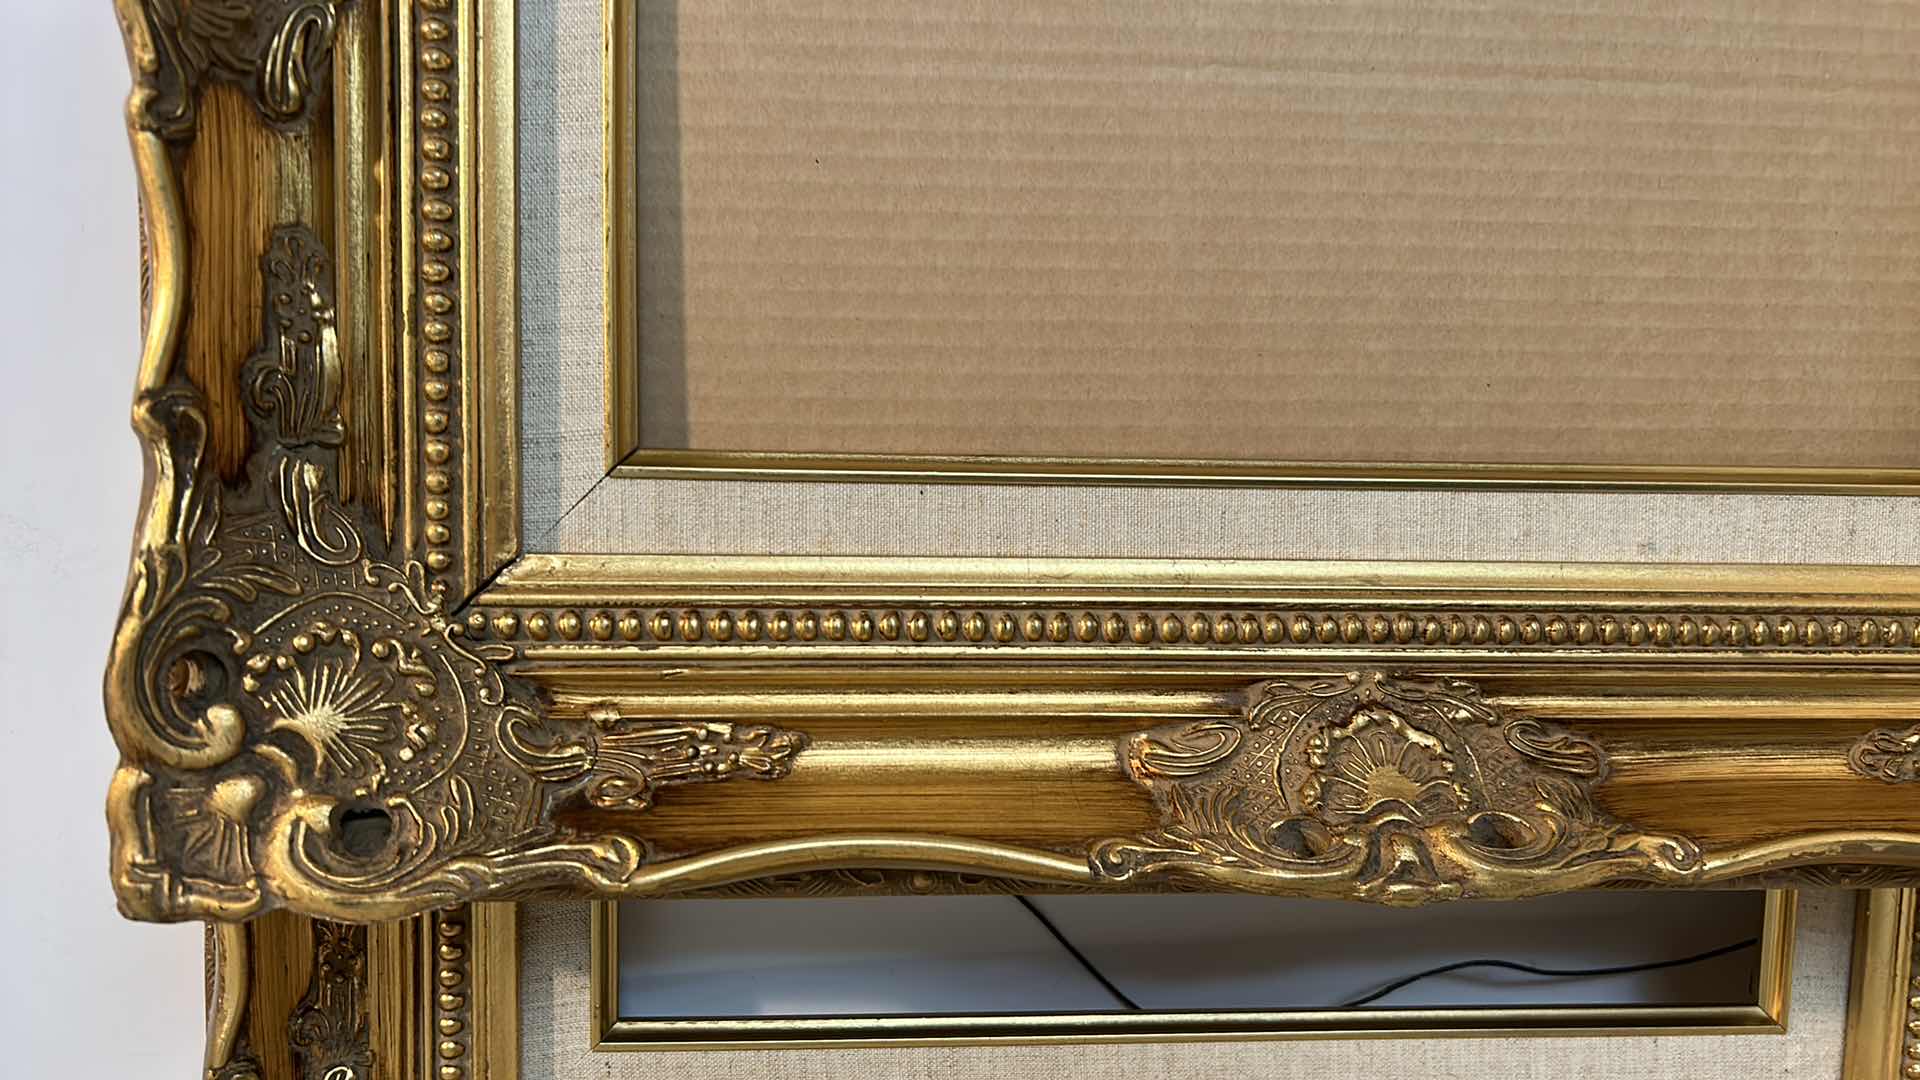 Photo 2 of 2 ORNATE GOLD SOLID WOOD FRAMES 19” x 22 1/2”